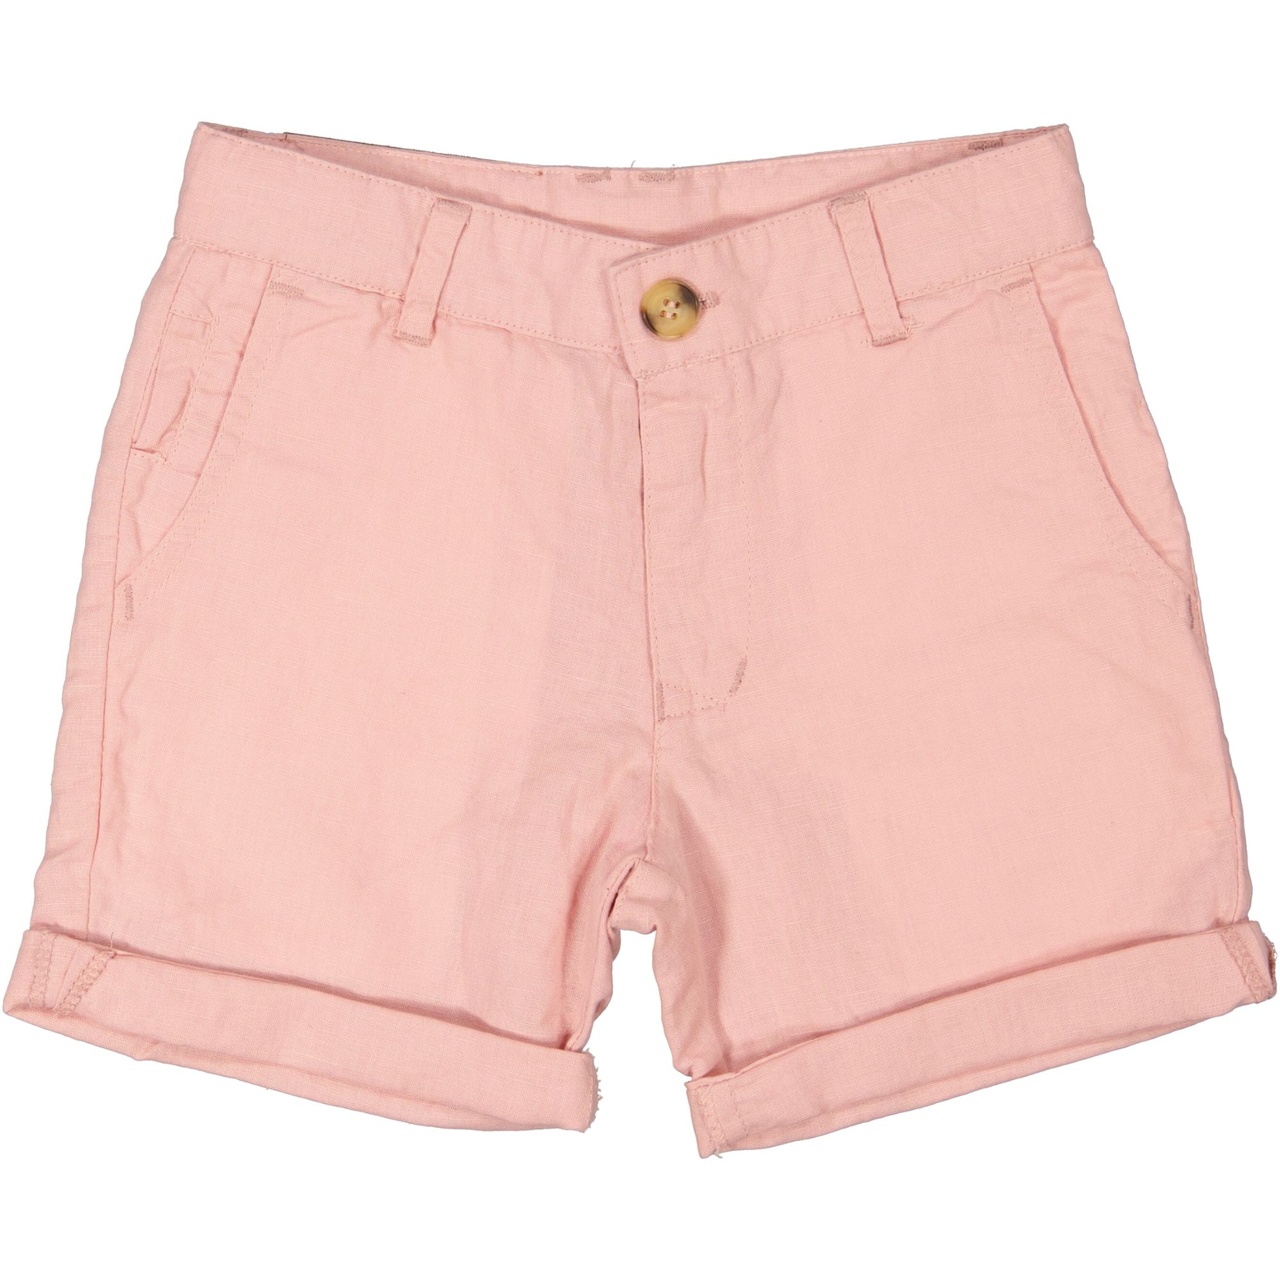 Linnen shorts Old pink 122/128